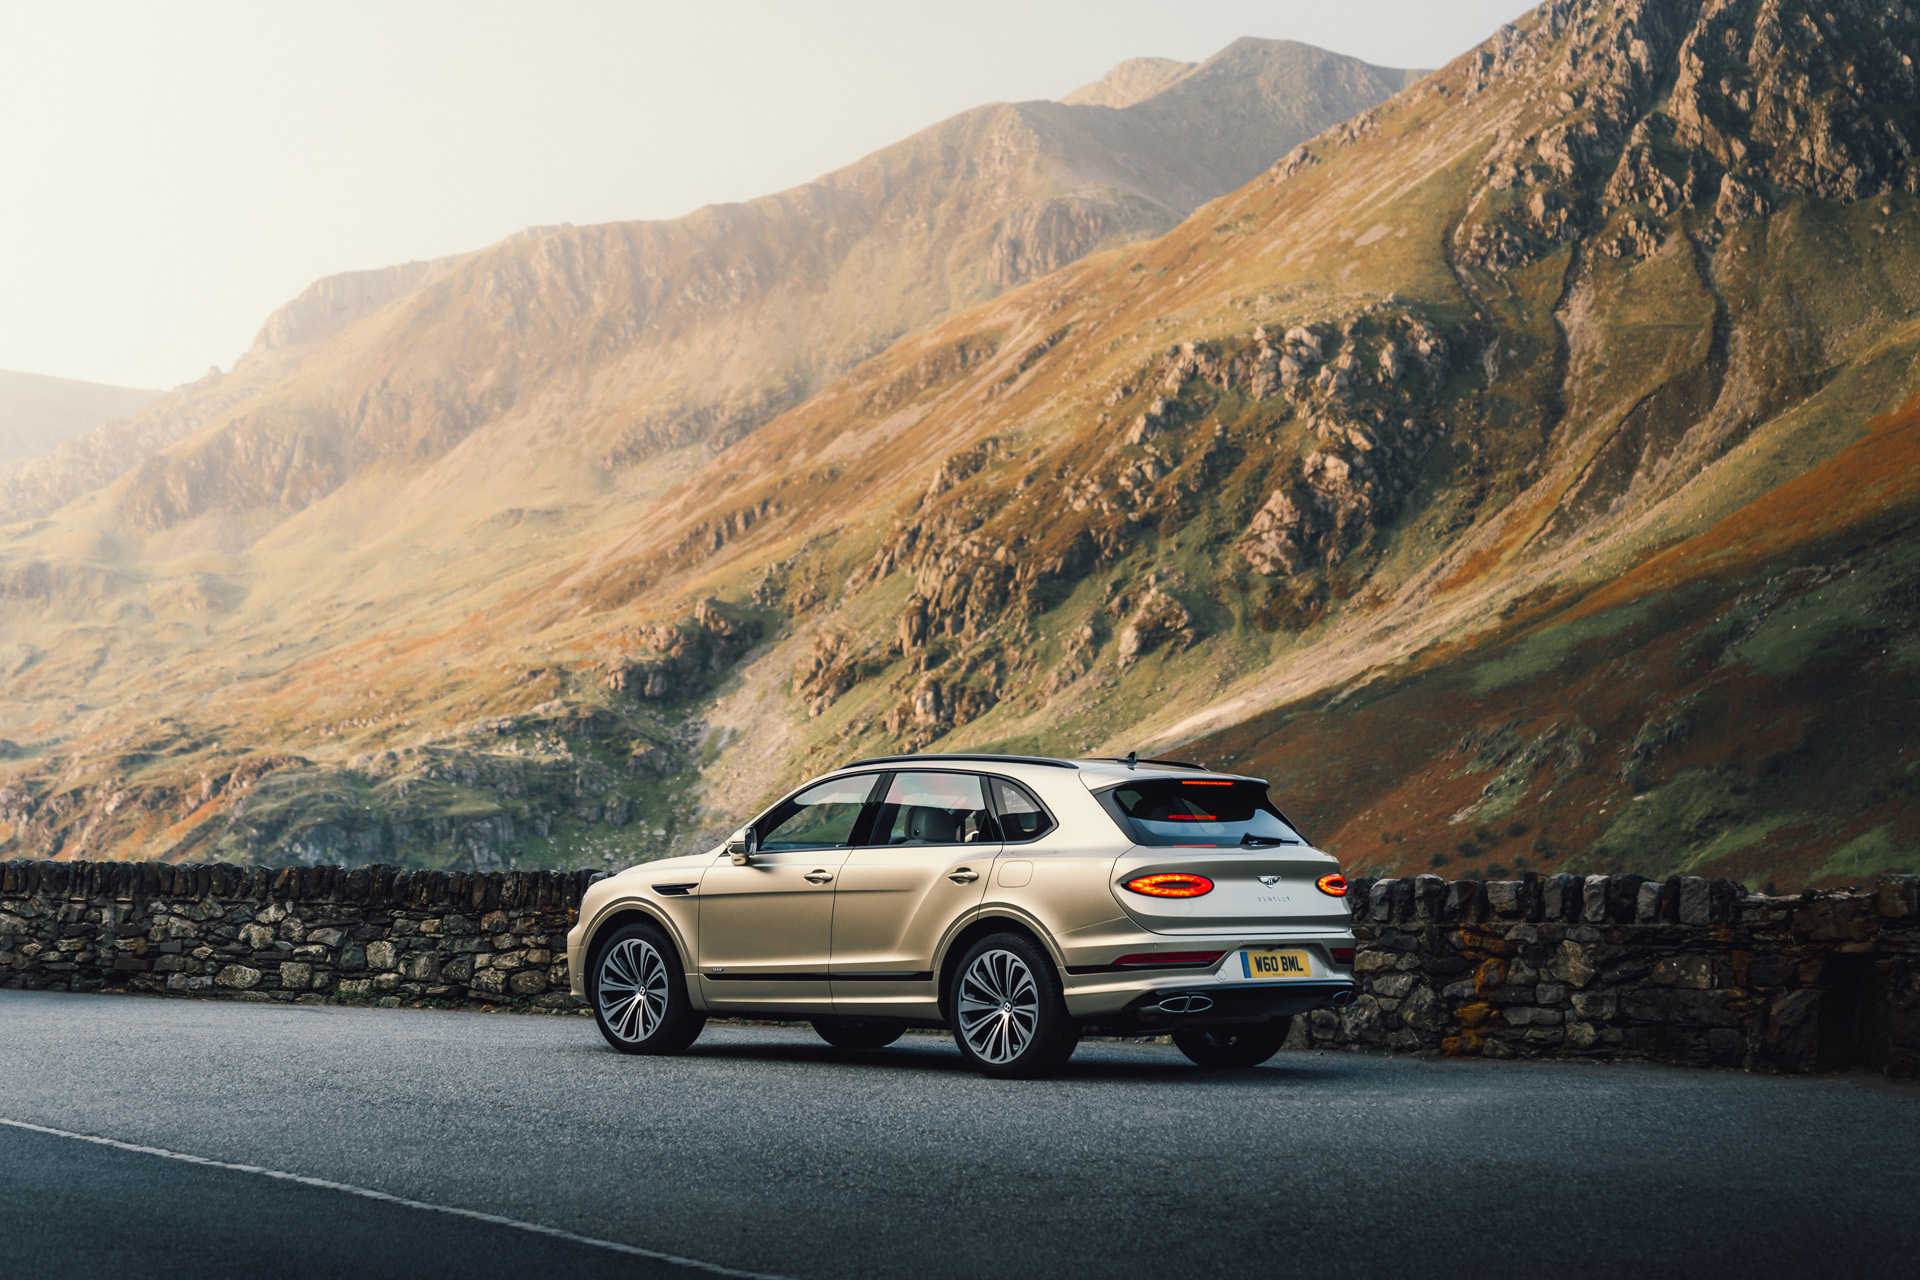 The New Bentayga Hybrid with a countryside landscape background